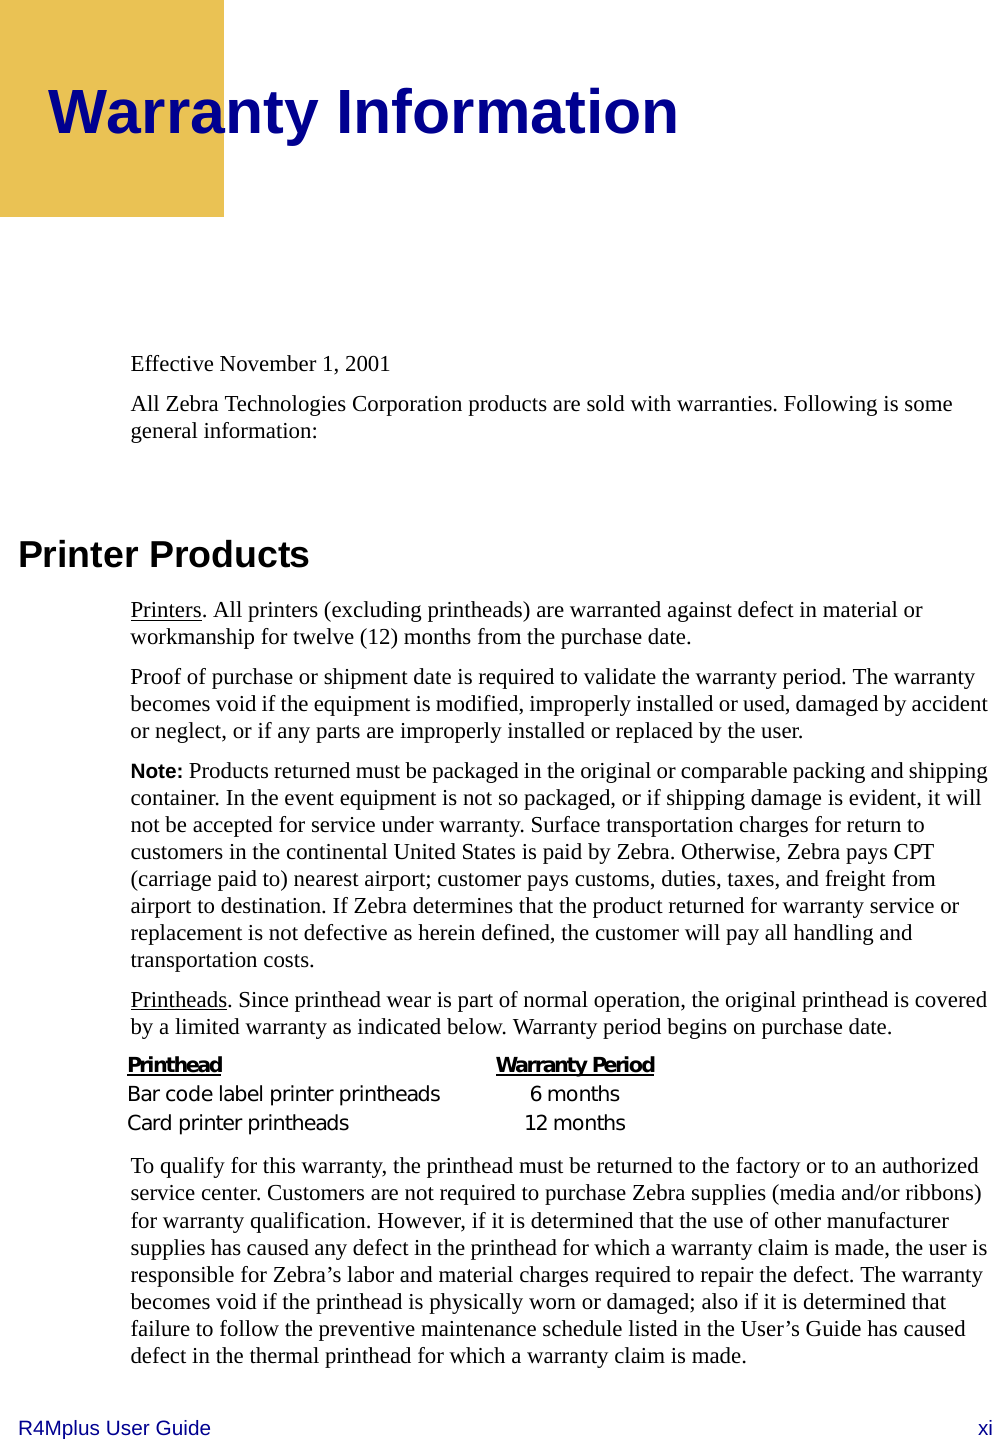 R4Mplus User Guide  xiWarranty InformationEffective November 1, 2001All Zebra Technologies Corporation products are sold with warranties. Following is some general information:Printer ProductsPrinters. All printers (excluding printheads) are warranted against defect in material or workmanship for twelve (12) months from the purchase date.Proof of purchase or shipment date is required to validate the warranty period. The warranty becomes void if the equipment is modified, improperly installed or used, damaged by accident or neglect, or if any parts are improperly installed or replaced by the user.Note: Products returned must be packaged in the original or comparable packing and shipping container. In the event equipment is not so packaged, or if shipping damage is evident, it will not be accepted for service under warranty. Surface transportation charges for return to customers in the continental United States is paid by Zebra. Otherwise, Zebra pays CPT (carriage paid to) nearest airport; customer pays customs, duties, taxes, and freight from airport to destination. If Zebra determines that the product returned for warranty service or replacement is not defective as herein defined, the customer will pay all handling and transportation costs.Printheads. Since printhead wear is part of normal operation, the original printhead is covered by a limited warranty as indicated below. Warranty period begins on purchase date.To qualify for this warranty, the printhead must be returned to the factory or to an authorized service center. Customers are not required to purchase Zebra supplies (media and/or ribbons) for warranty qualification. However, if it is determined that the use of other manufacturer supplies has caused any defect in the printhead for which a warranty claim is made, the user is responsible for Zebra’s labor and material charges required to repair the defect. The warranty becomes void if the printhead is physically worn or damaged; also if it is determined that failure to follow the preventive maintenance schedule listed in the User’s Guide has caused defect in the thermal printhead for which a warranty claim is made.Printhead Warranty PeriodBar code label printer printheads 6 monthsCard printer printheads 12 months